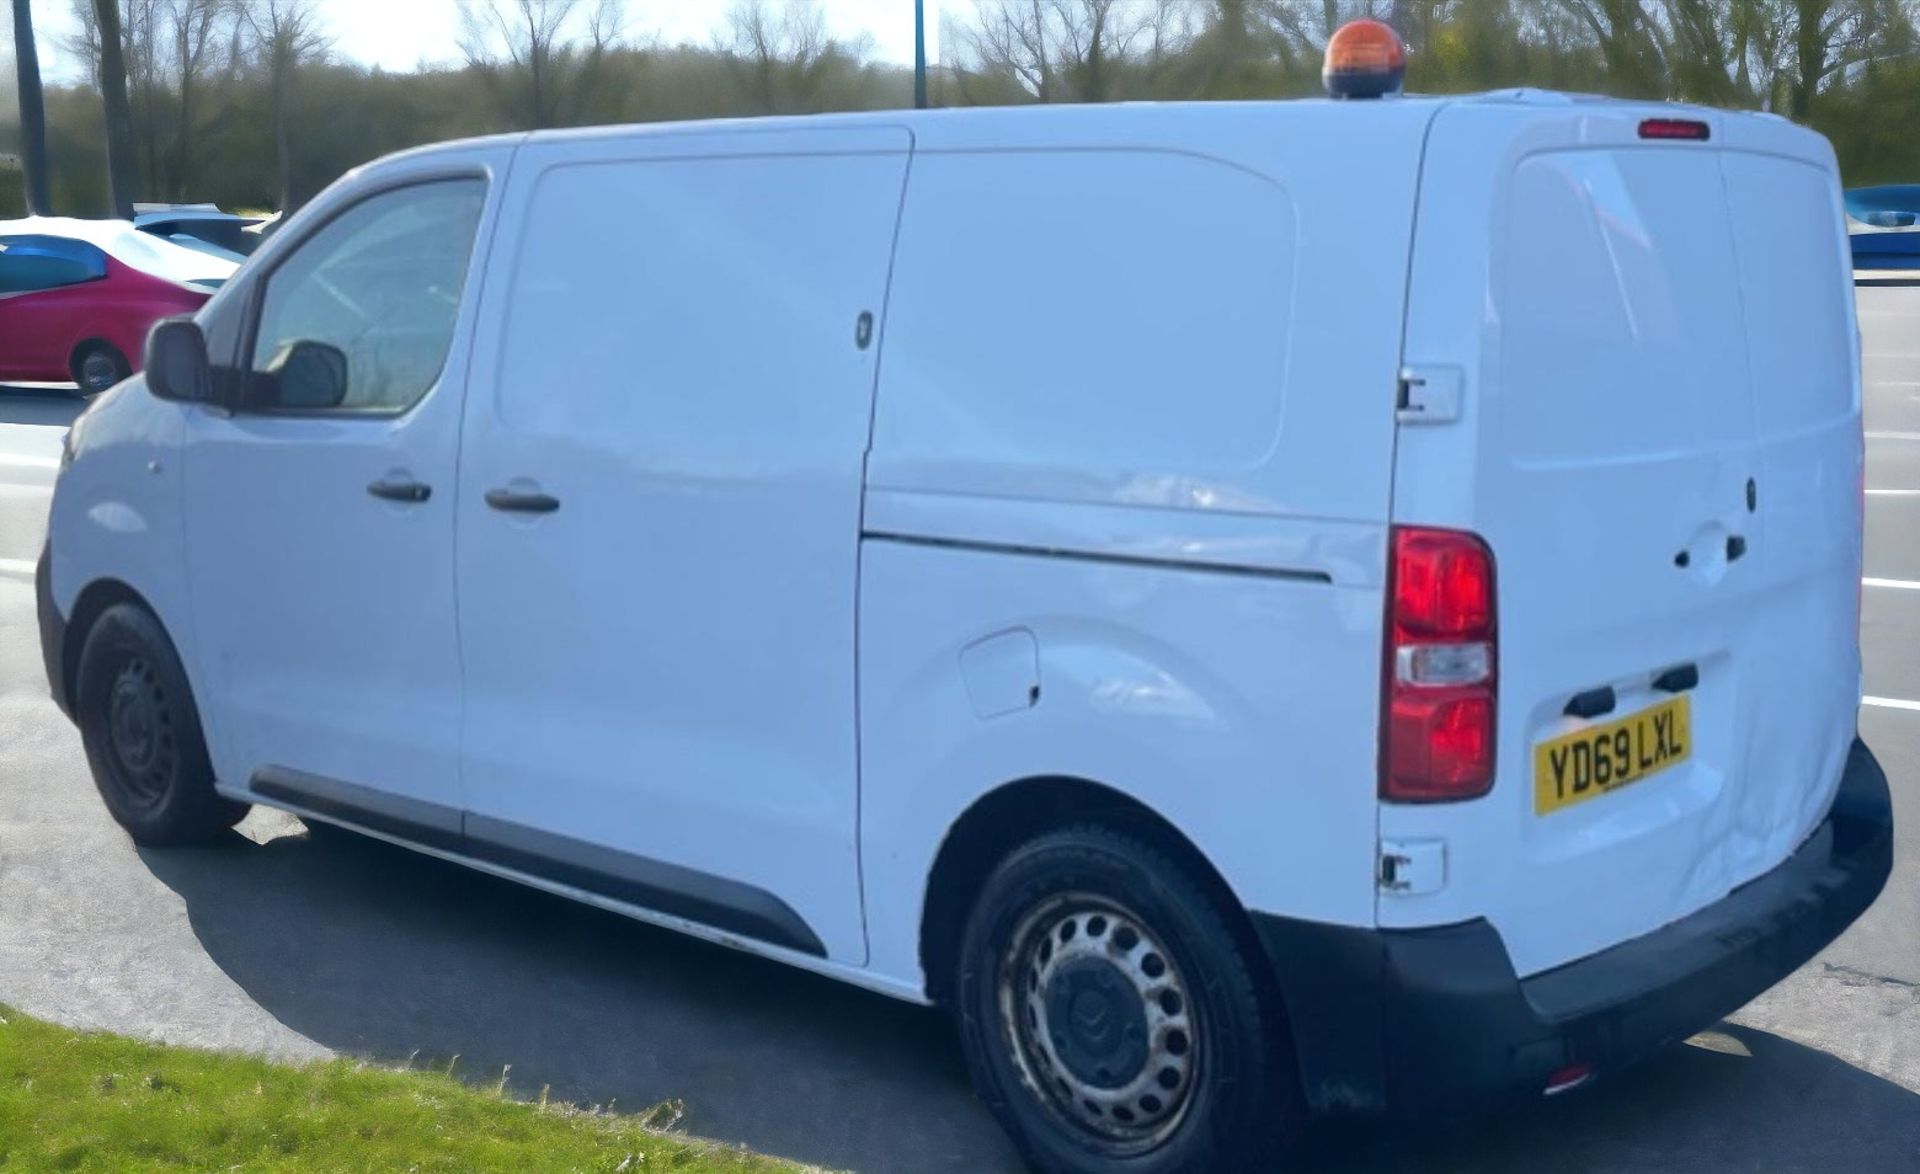 2019-69 REG CITROEN DISPATCH XS 1000 L1H1 - HPI CLEAR - READY TO GO! - Image 2 of 12